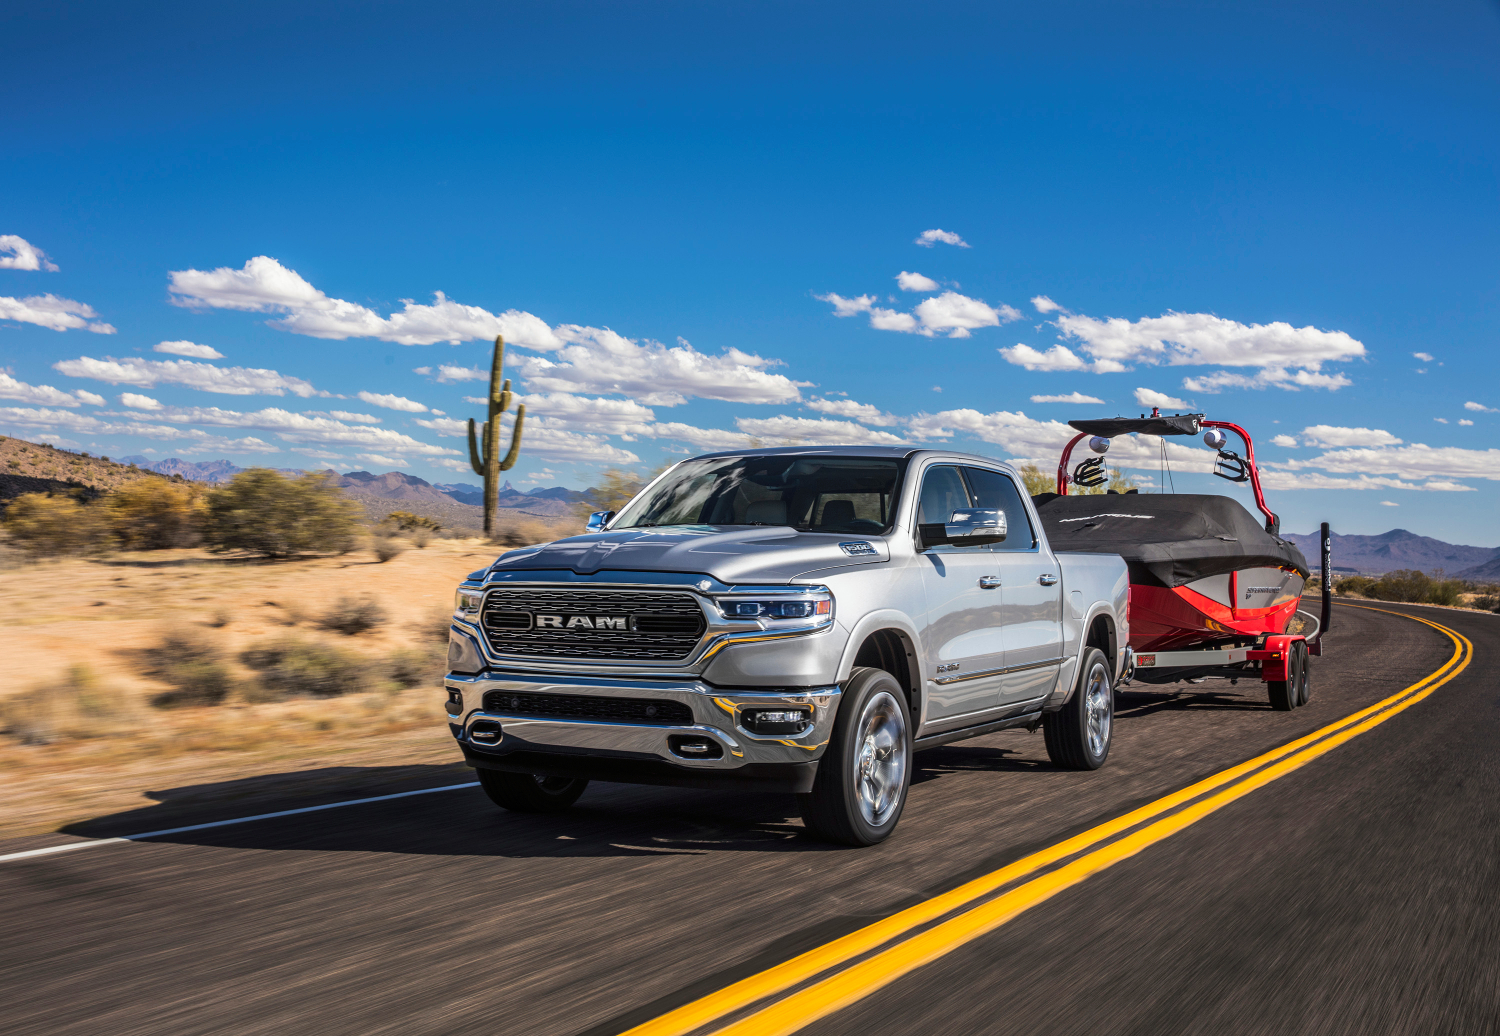 The 2022 Ram 1500, 2022 Ford F-150, and 2022 Toyota Tundra are some of the Best Full-Size Pickup Trucks